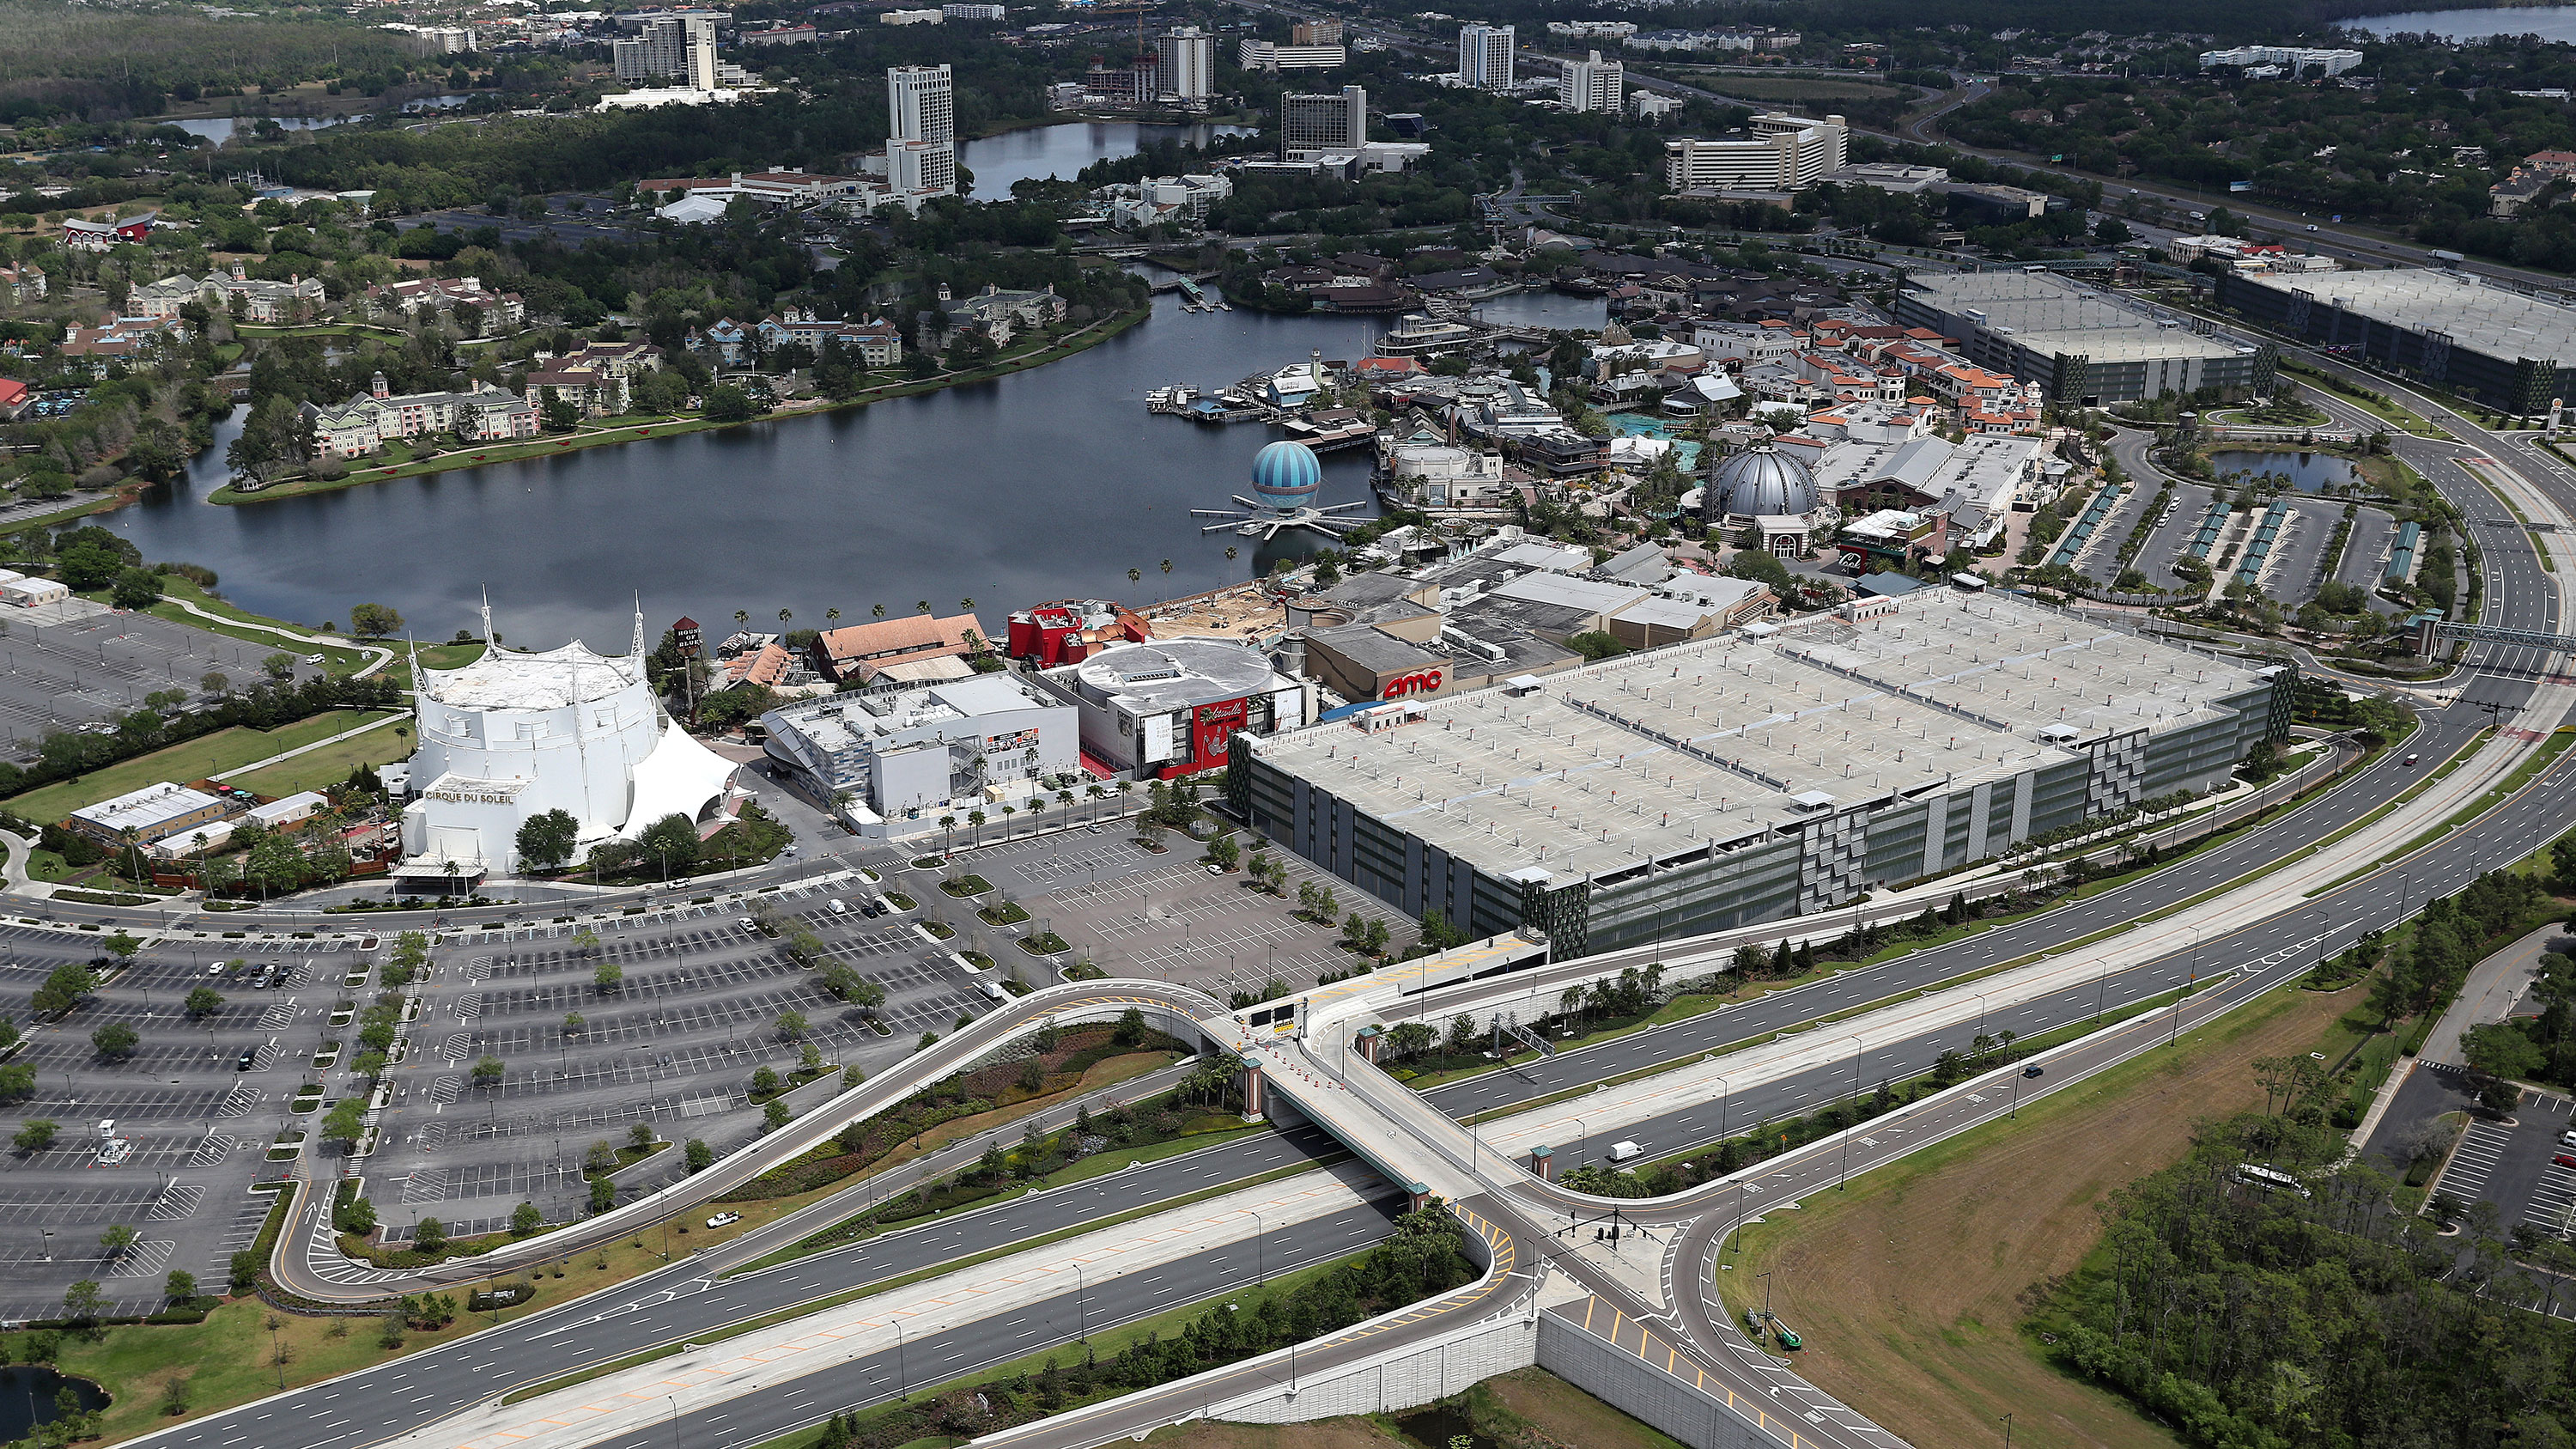 Disney Springs shopping areas on March 23.